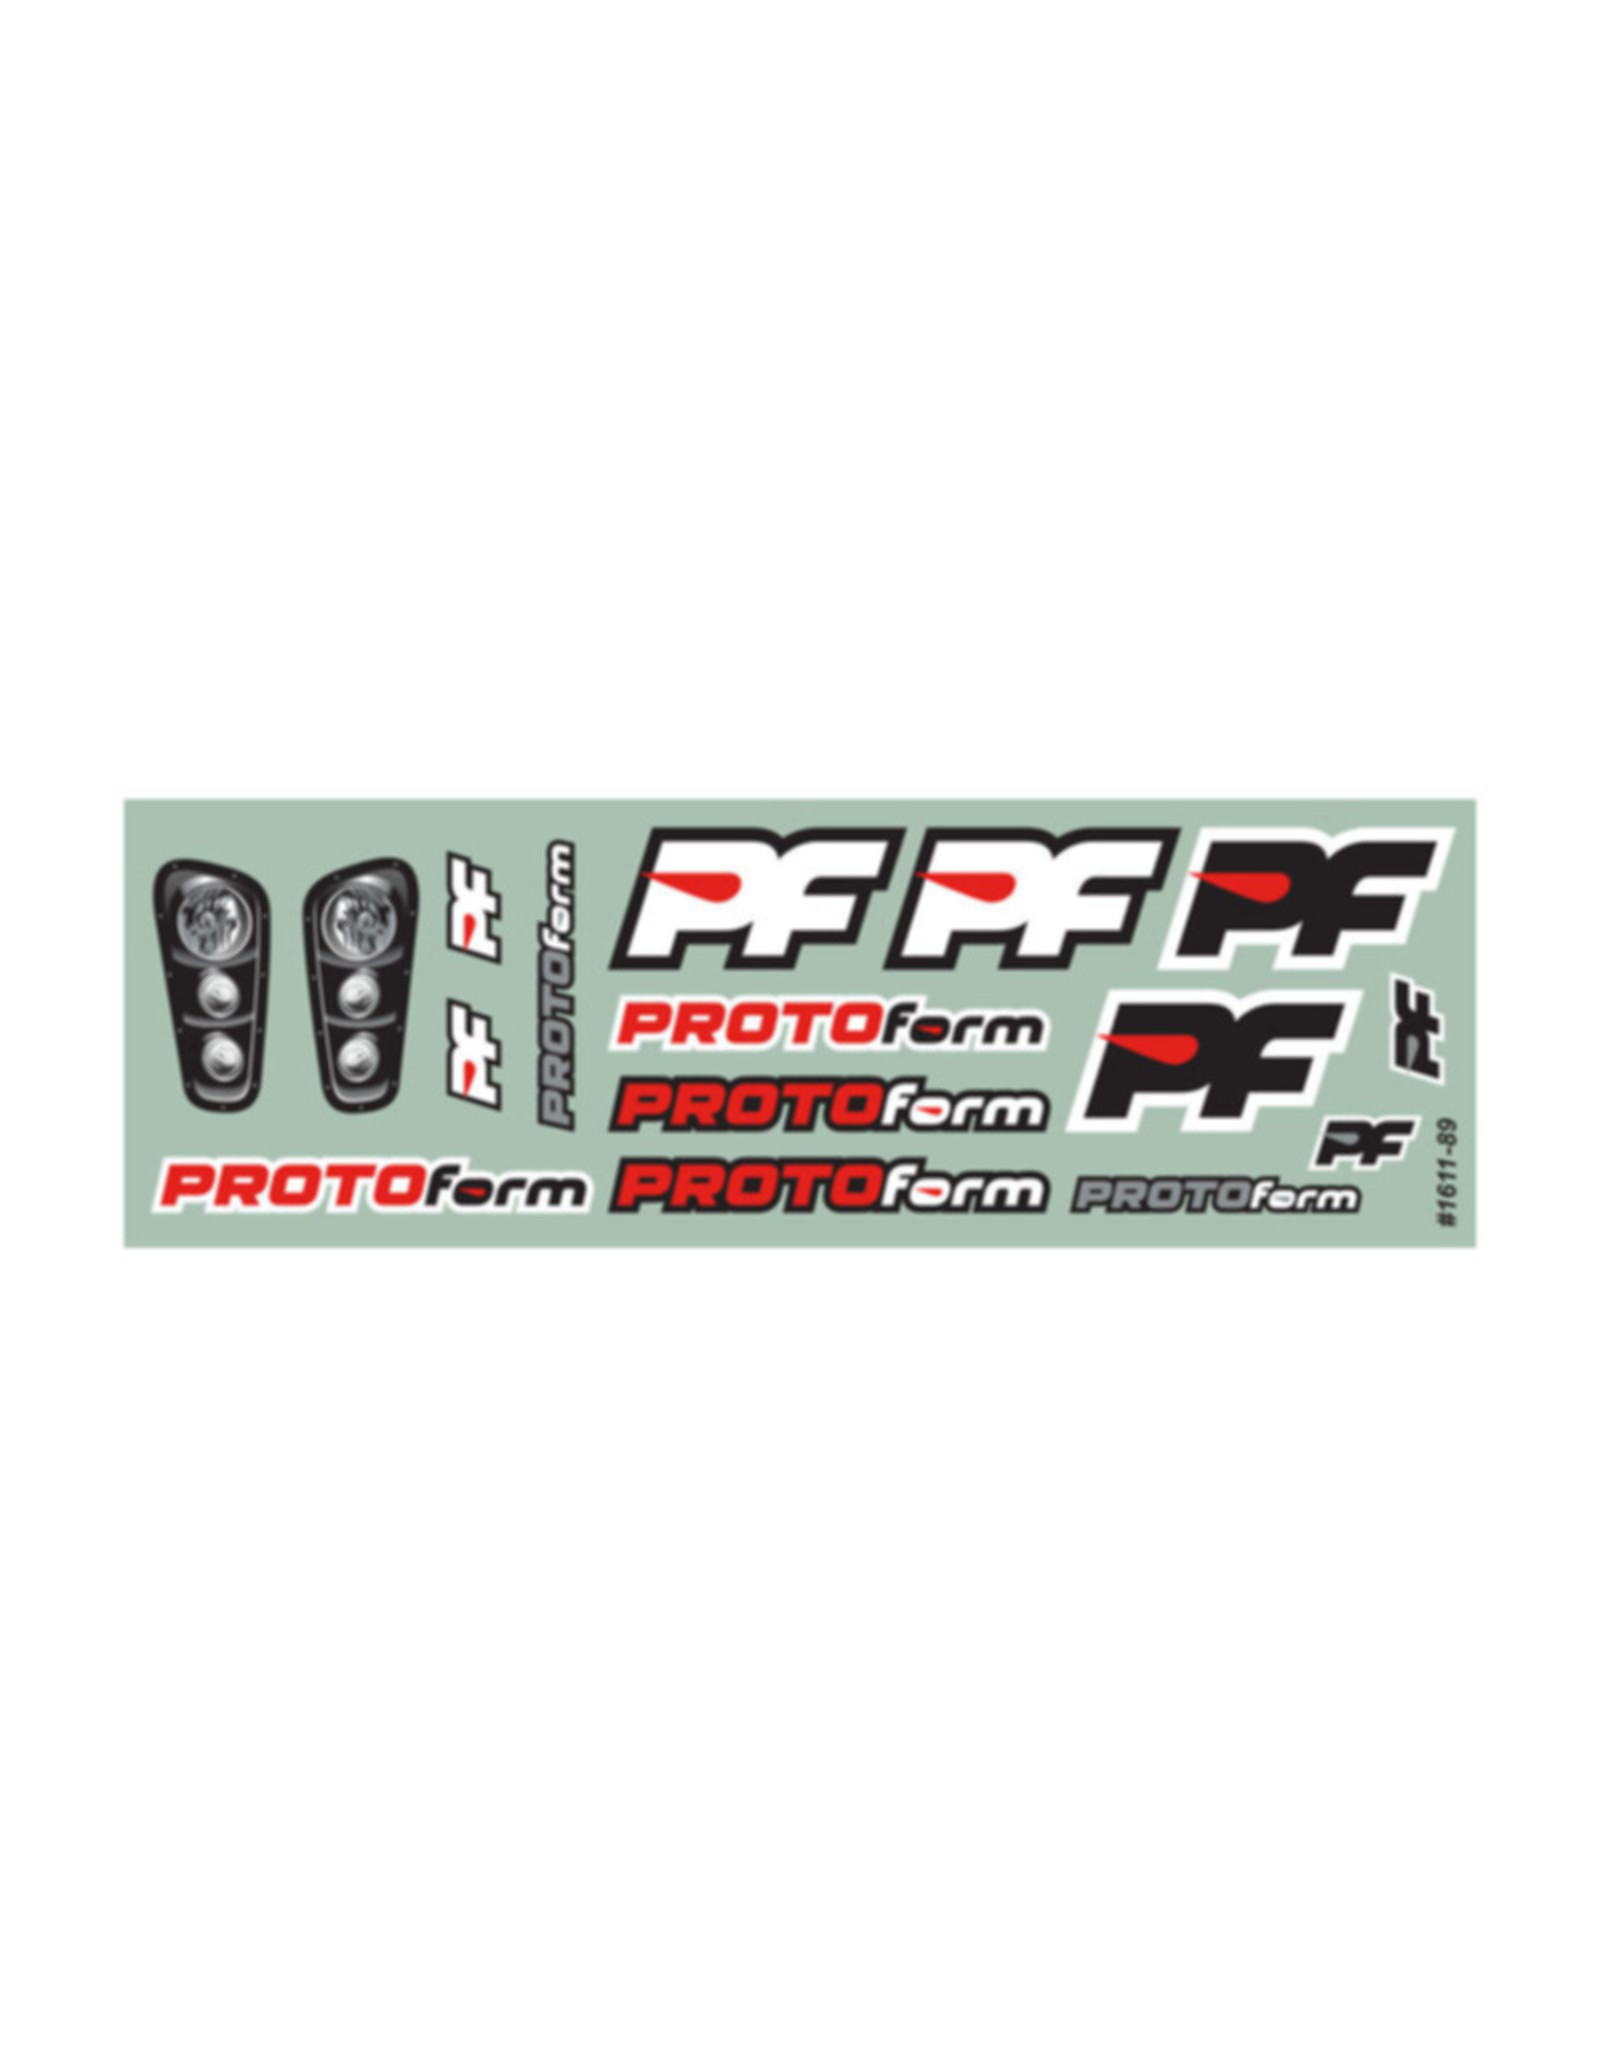 Protoform PRM161115  1/12 AMR-12 PRO LightWeight Clear Body On-Road